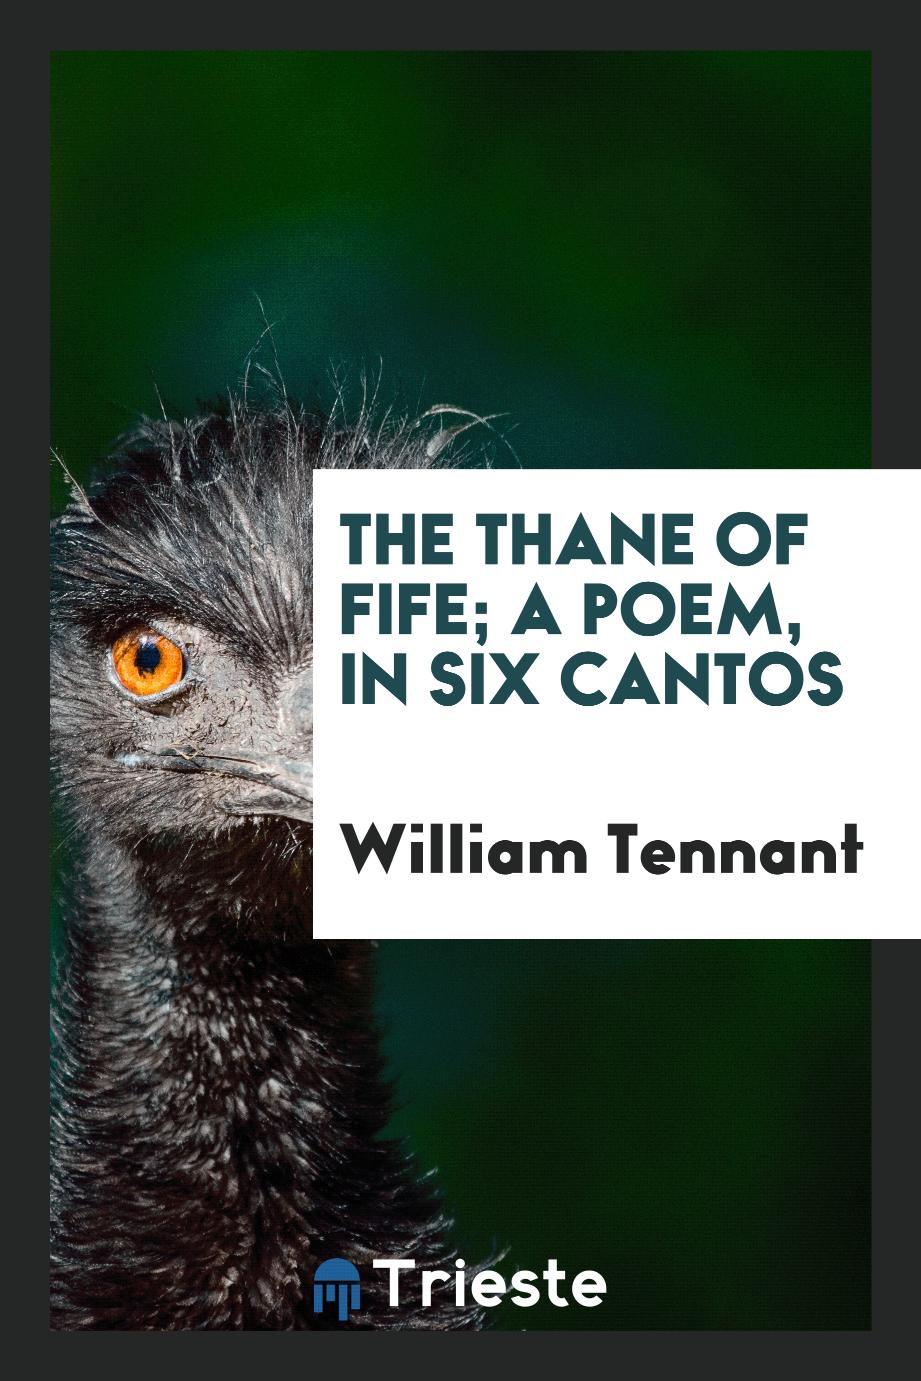 The Thane of Fife; a poem, in six cantos